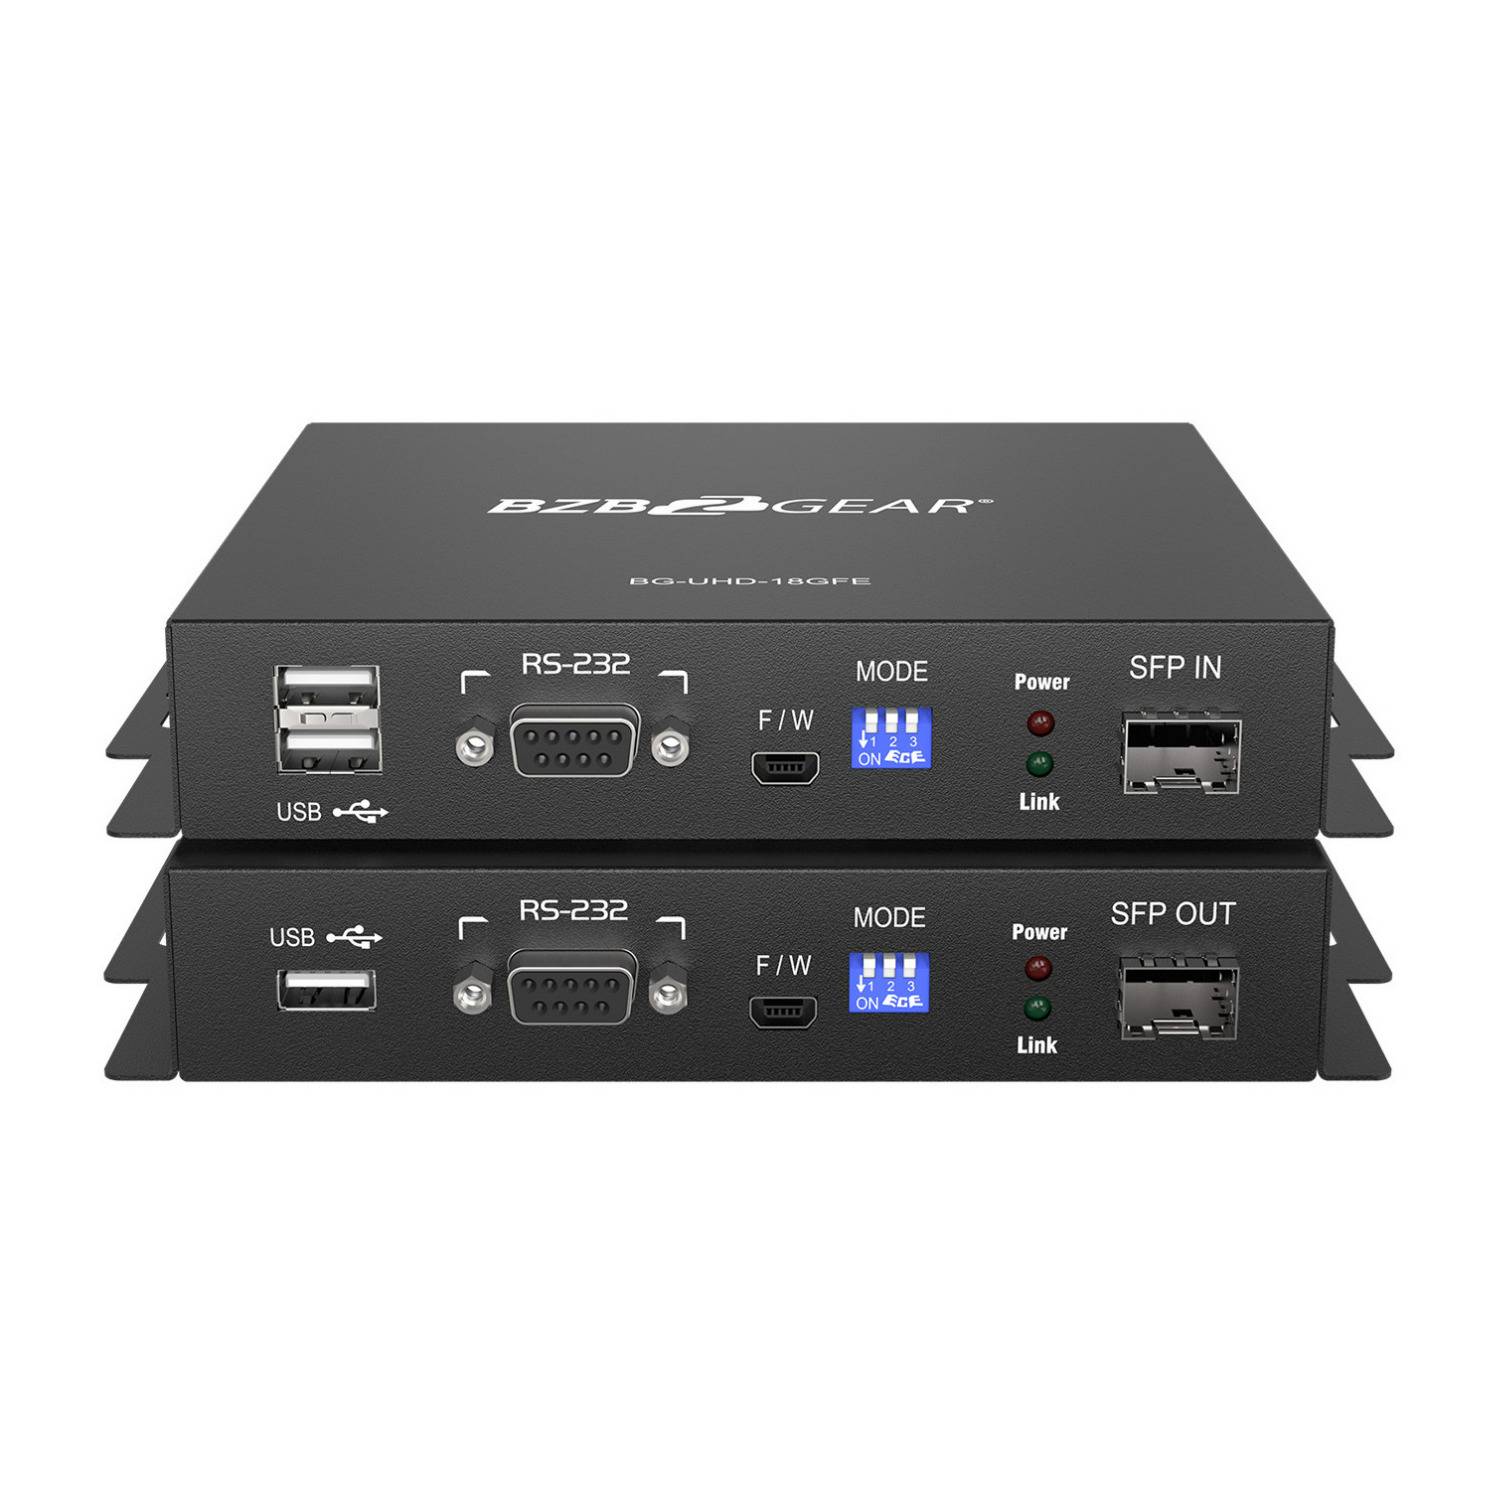 BZBGear 4K HDMI USB KVM Extender Kit over Fiber with HDR, 2-Way IR and RS-232